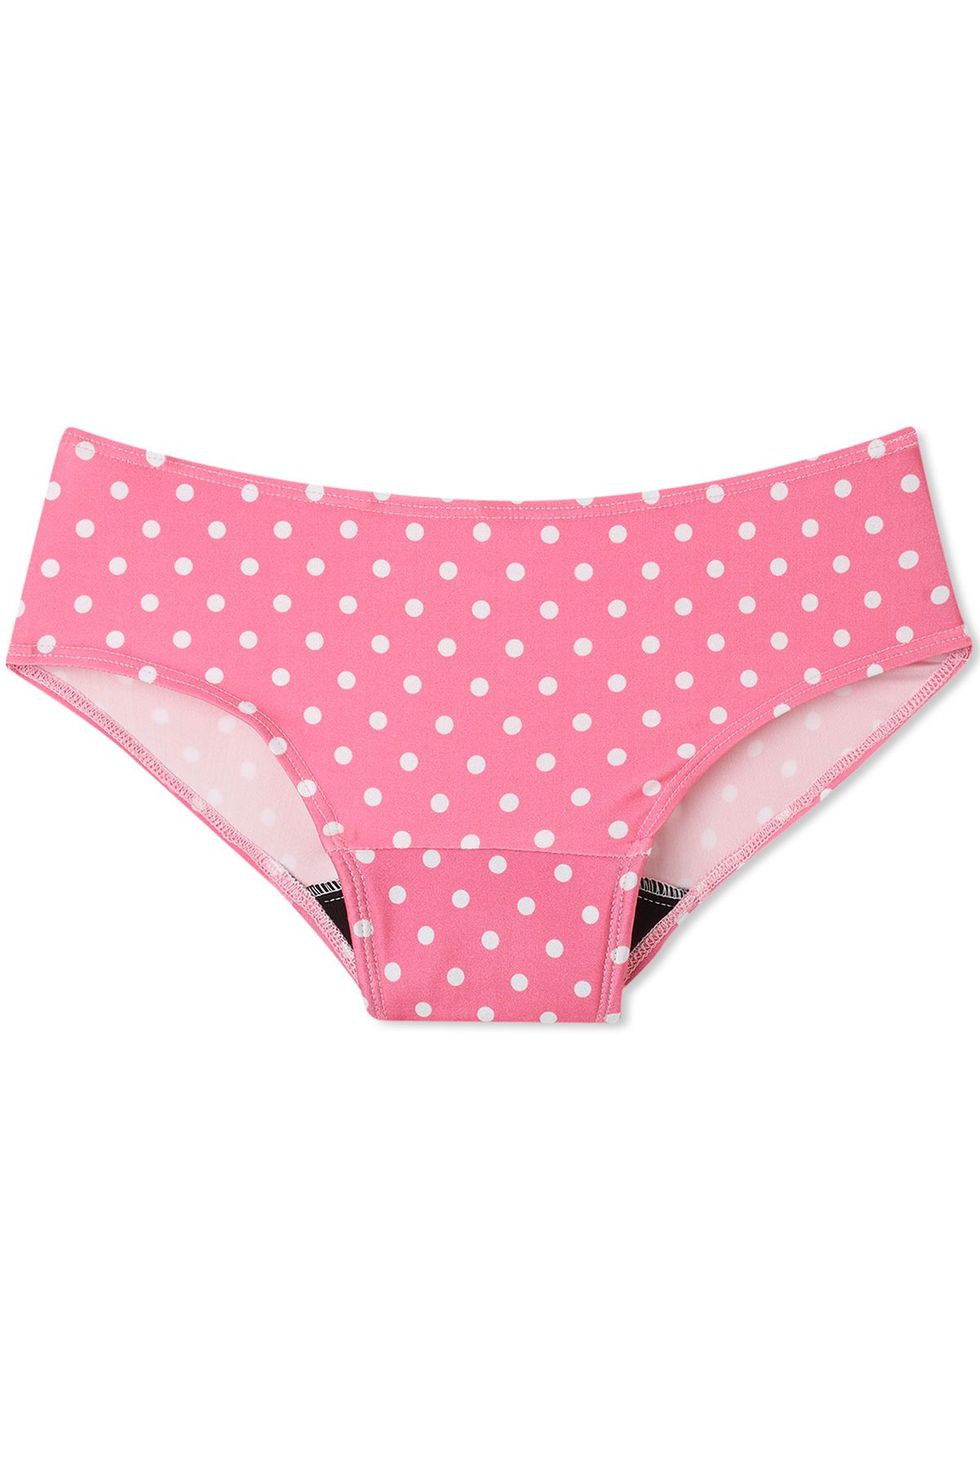 The Best Underwear for Your Period - 10 Must-Have Pairs of Period Panties